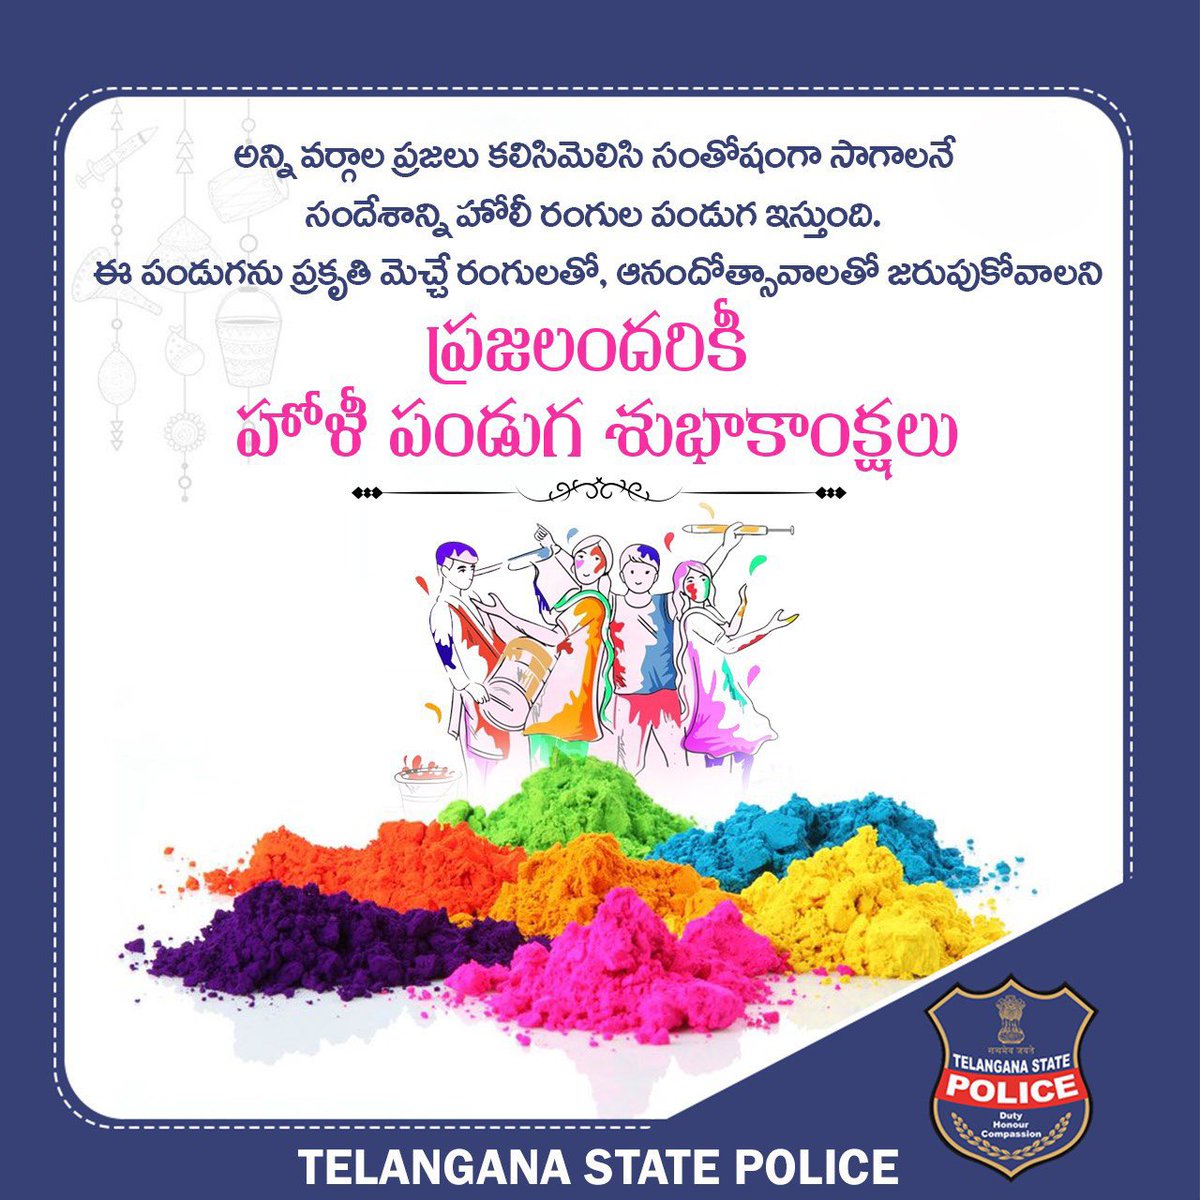 Happy Holi everyone! Let the colours of Holi spread the message of peace and happiness. #TelanganaPolice #Holi